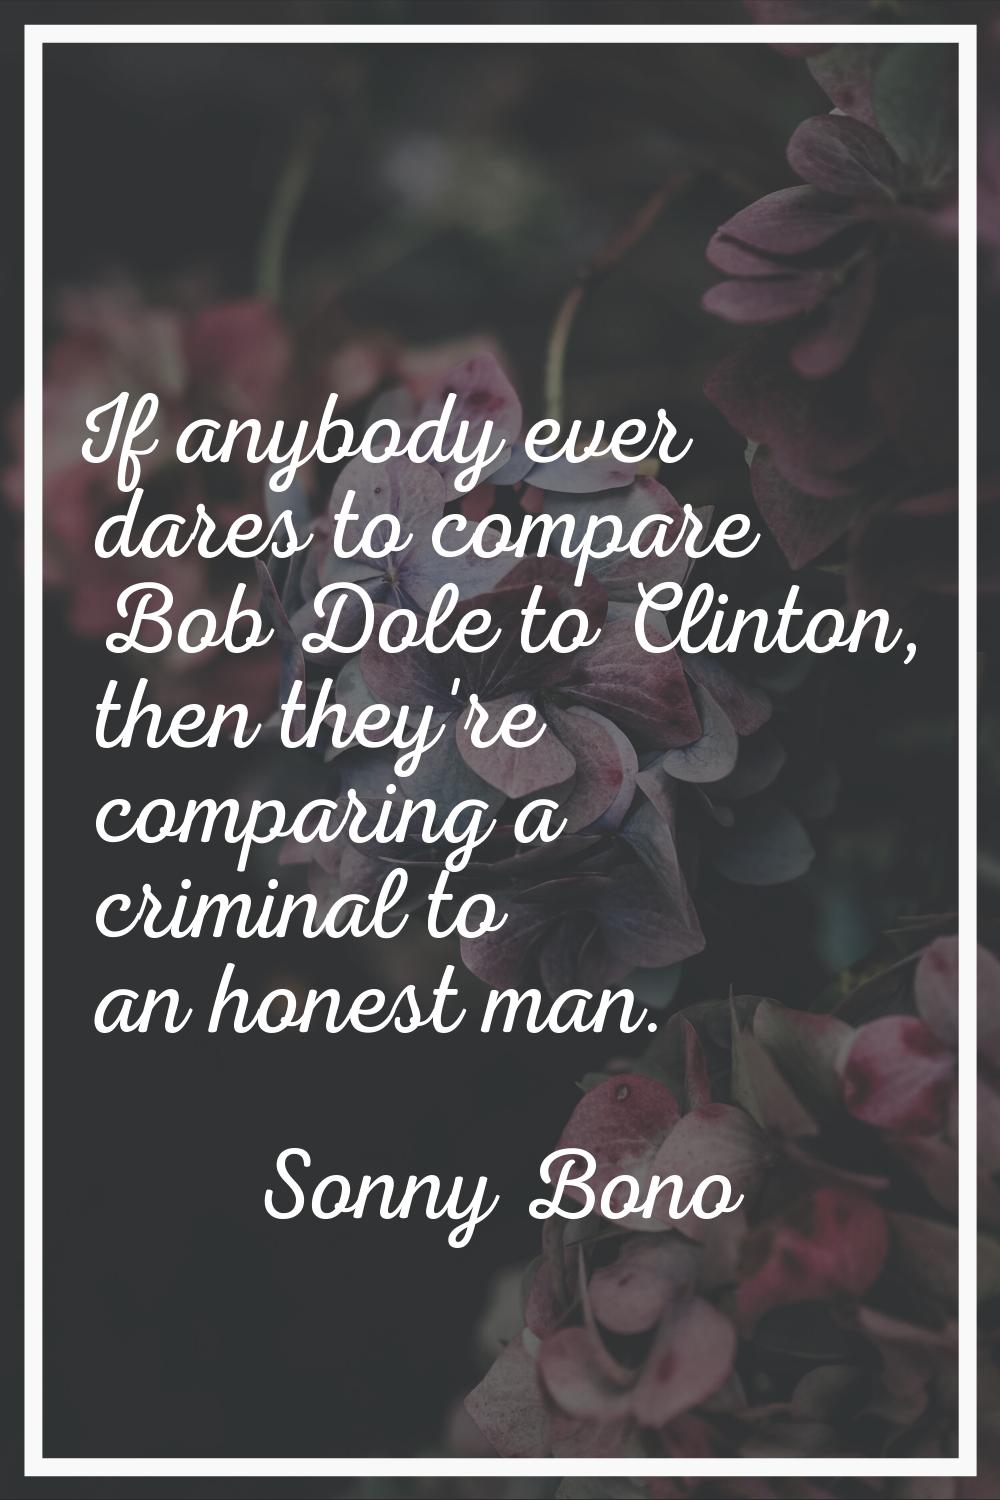 If anybody ever dares to compare Bob Dole to Clinton, then they're comparing a criminal to an hones